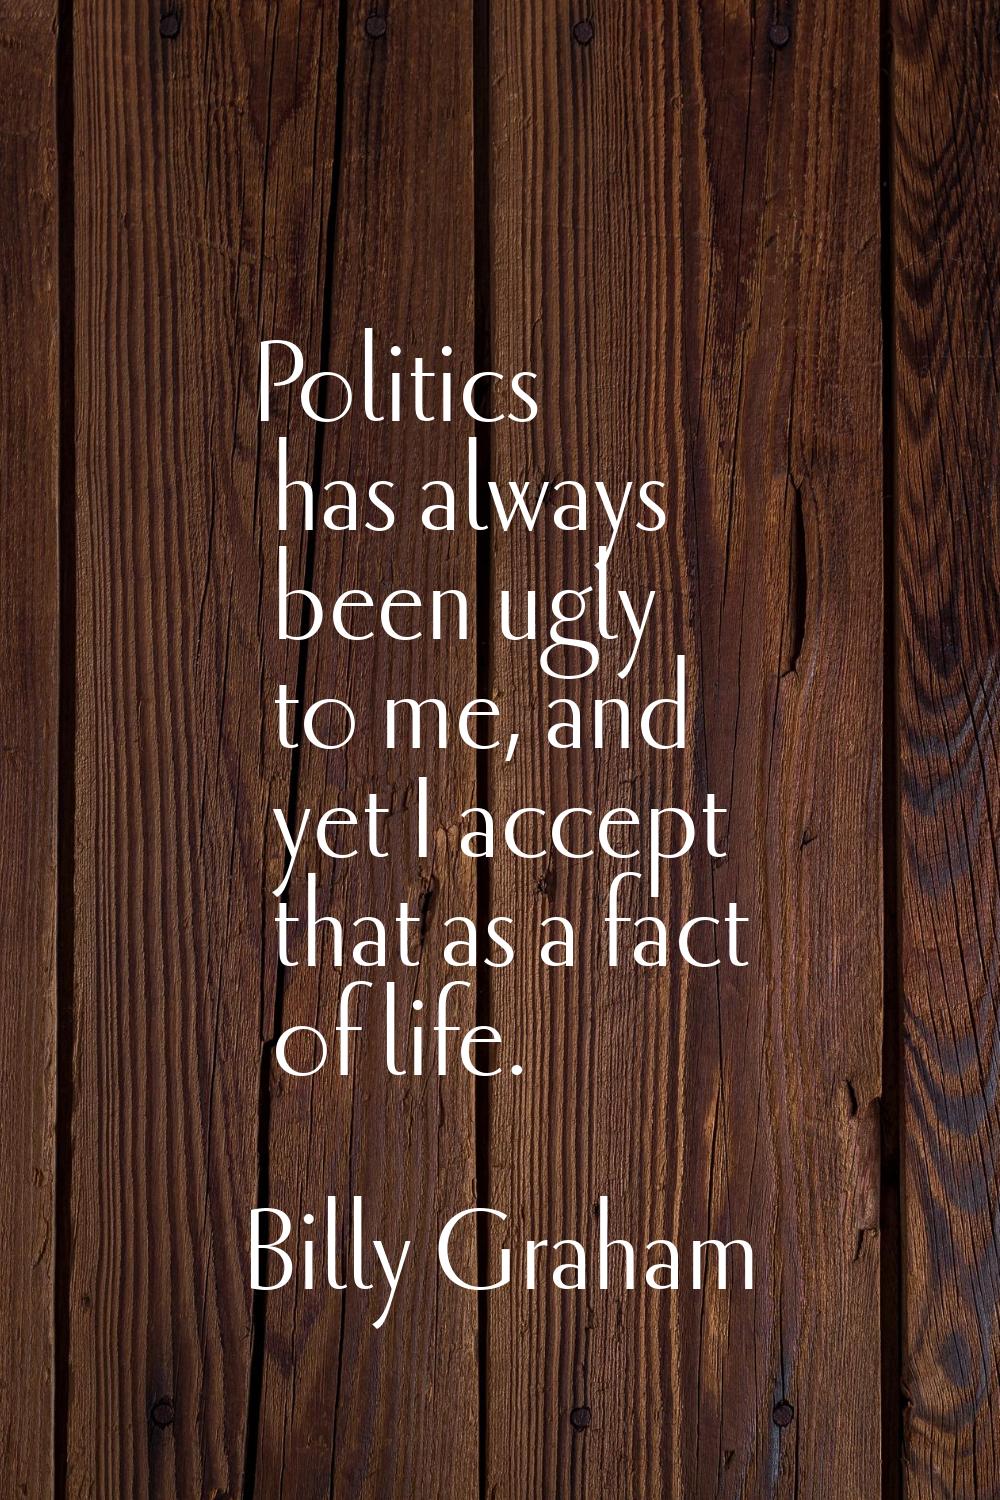 Politics has always been ugly to me, and yet I accept that as a fact of life.